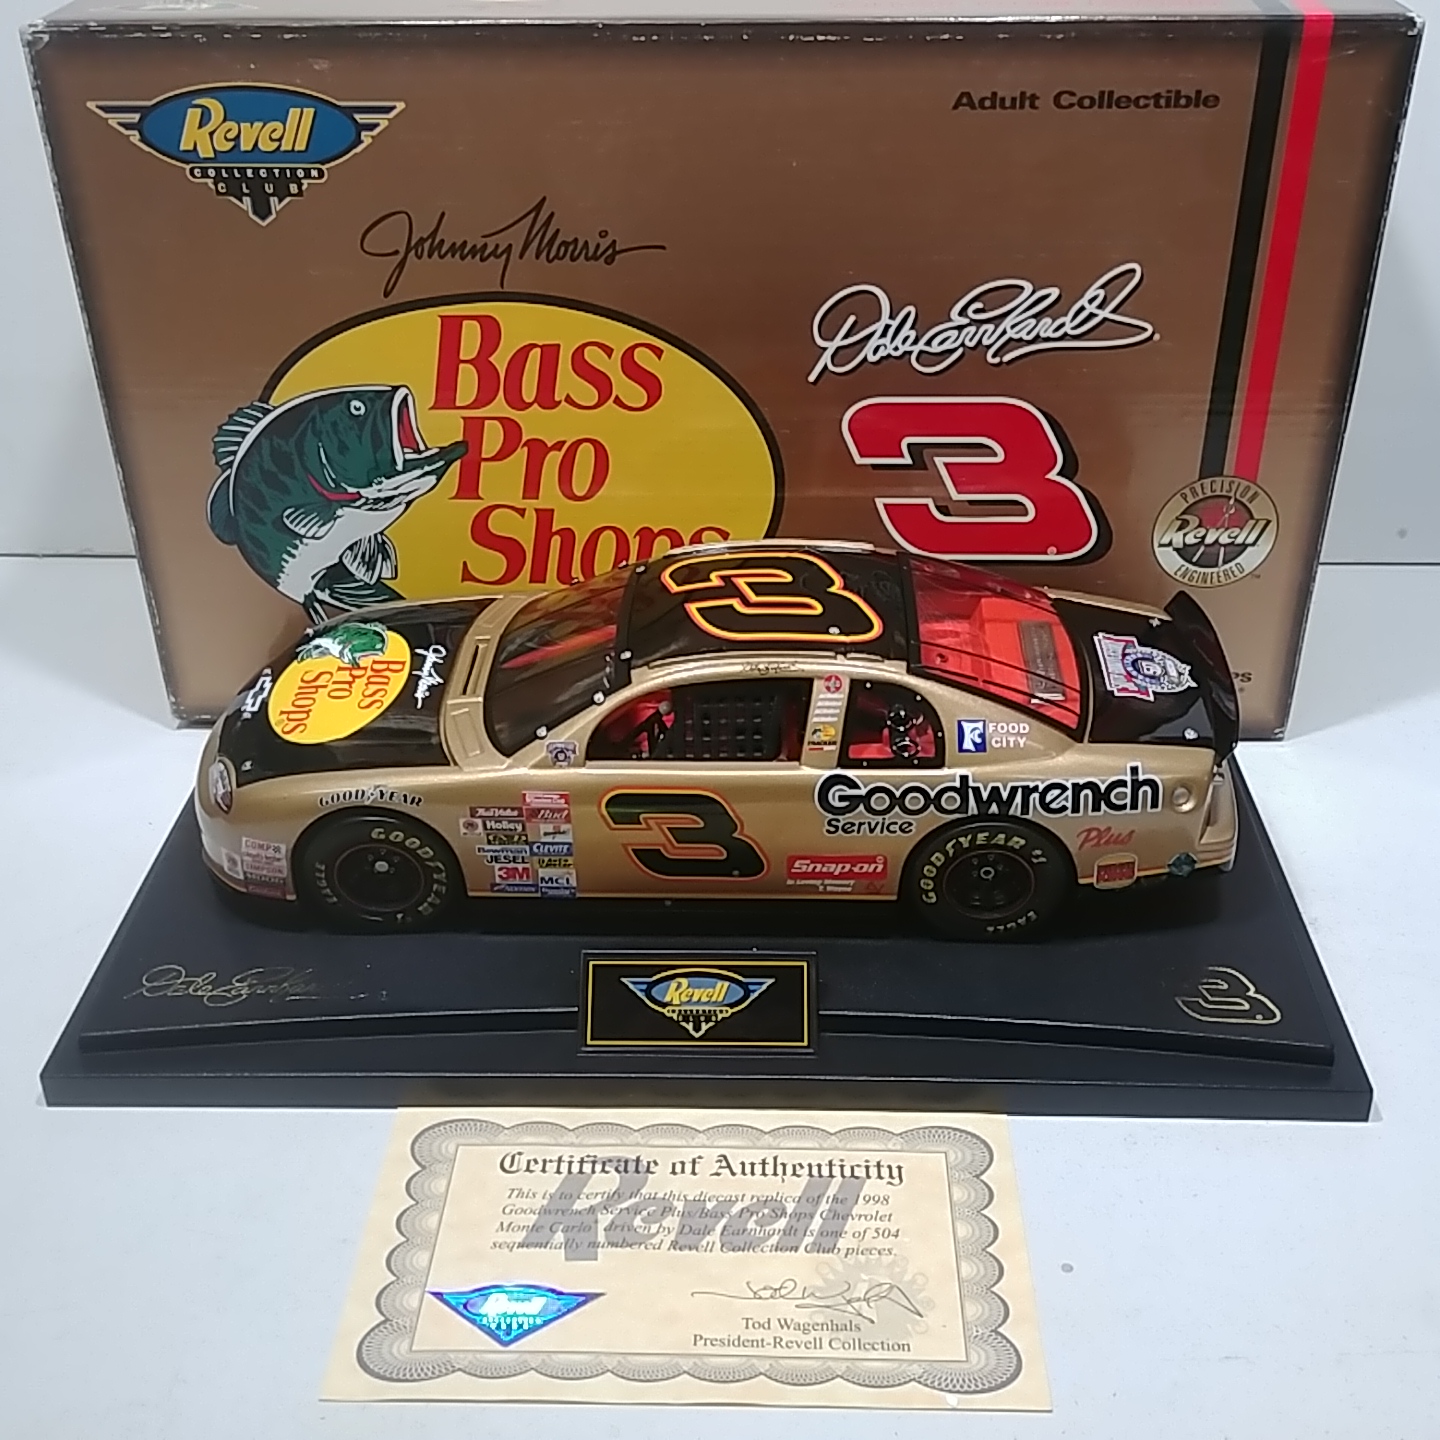 1998 Dale Earnhardt 1/18th Goodwrench "Bass Pro Shops" Monte Carlo